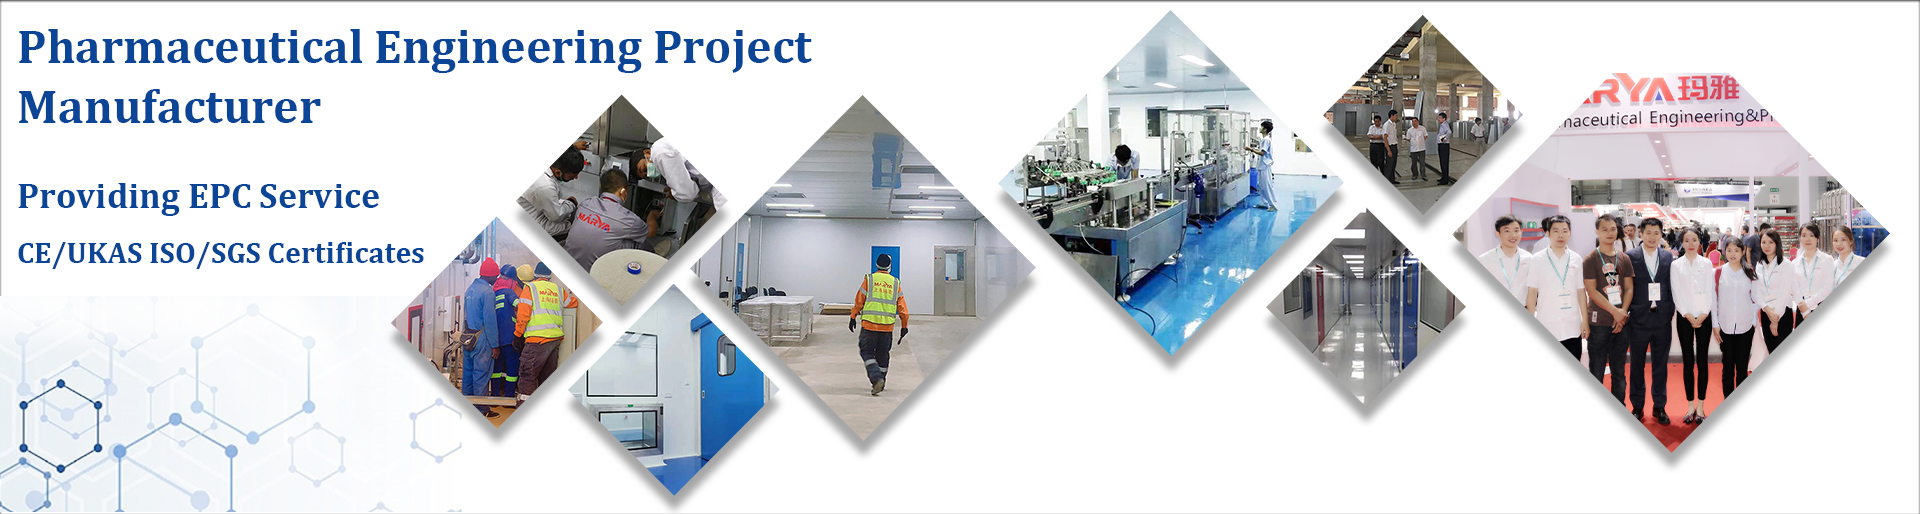 Pharmaceutical Engineering project solution provider & manufacturer